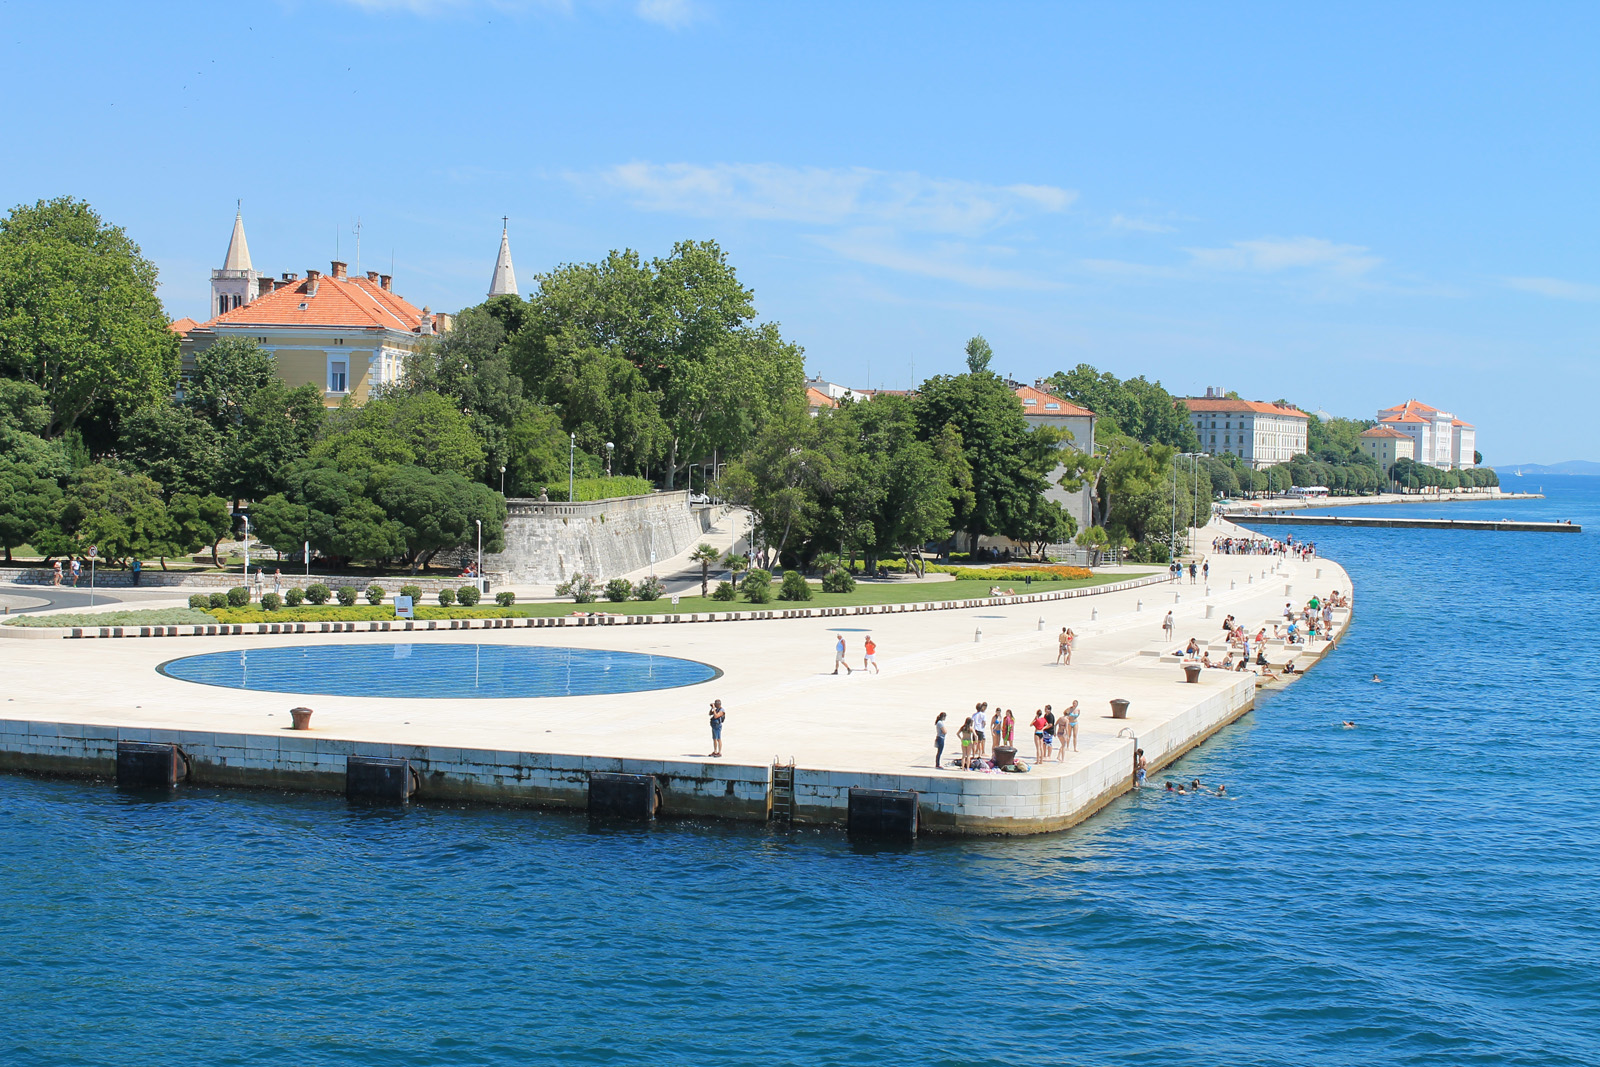 Croatia 230 foot long organ that makes hauntingly beautiful music from the sea! Complete details